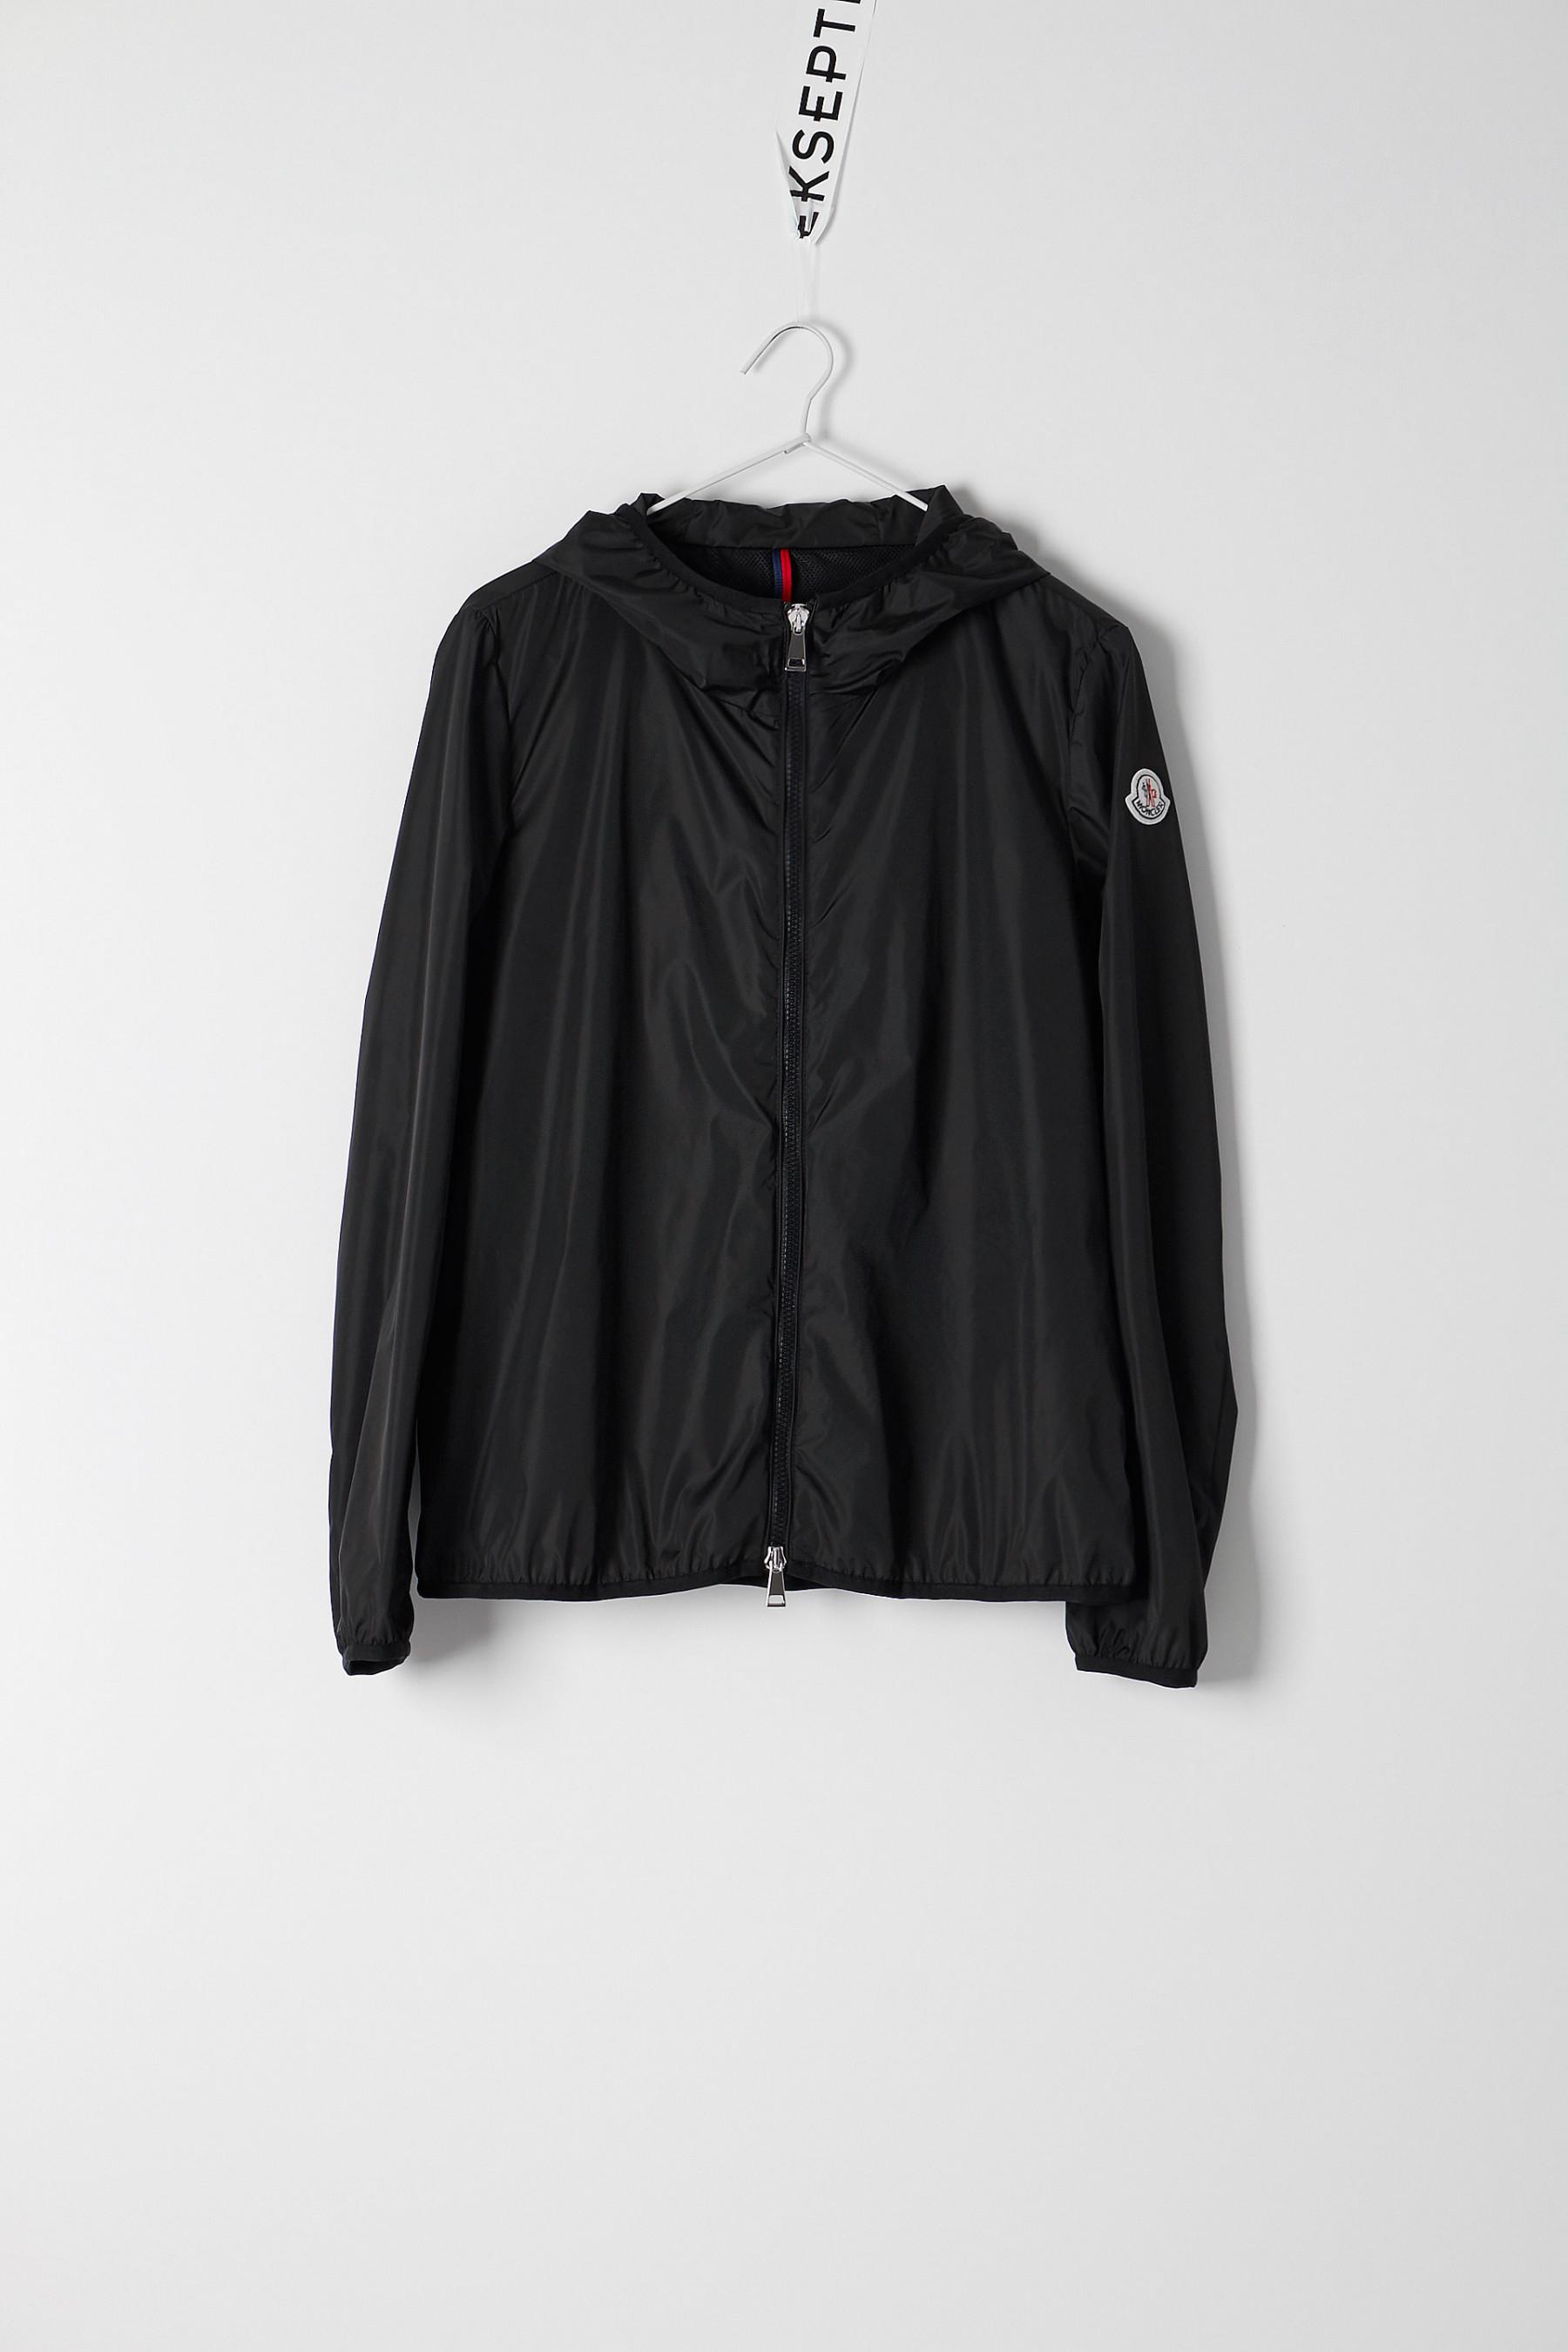 Moncler Synthetic Vive Jacket in Black 